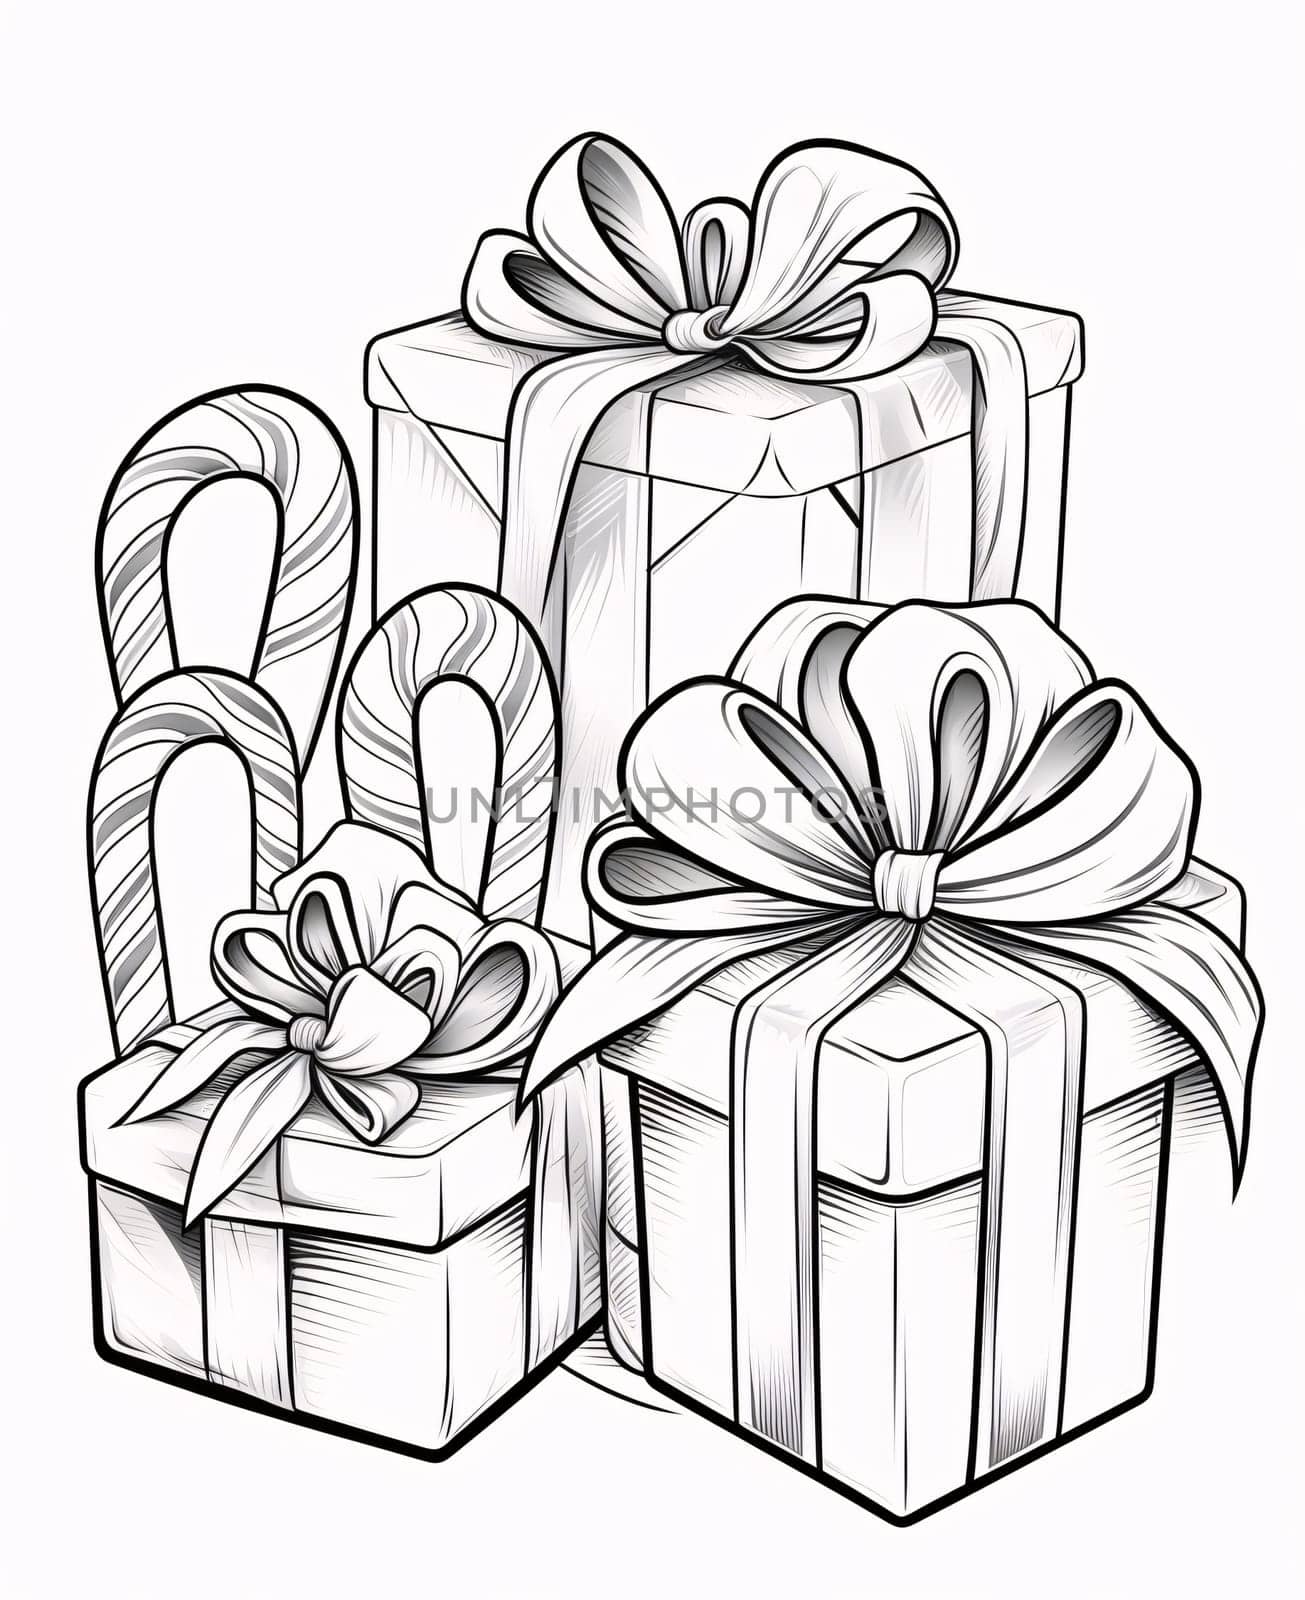 Black and white coloring card: gifts with bows and sticks. Gifts as a day symbol of present and love. by ThemesS